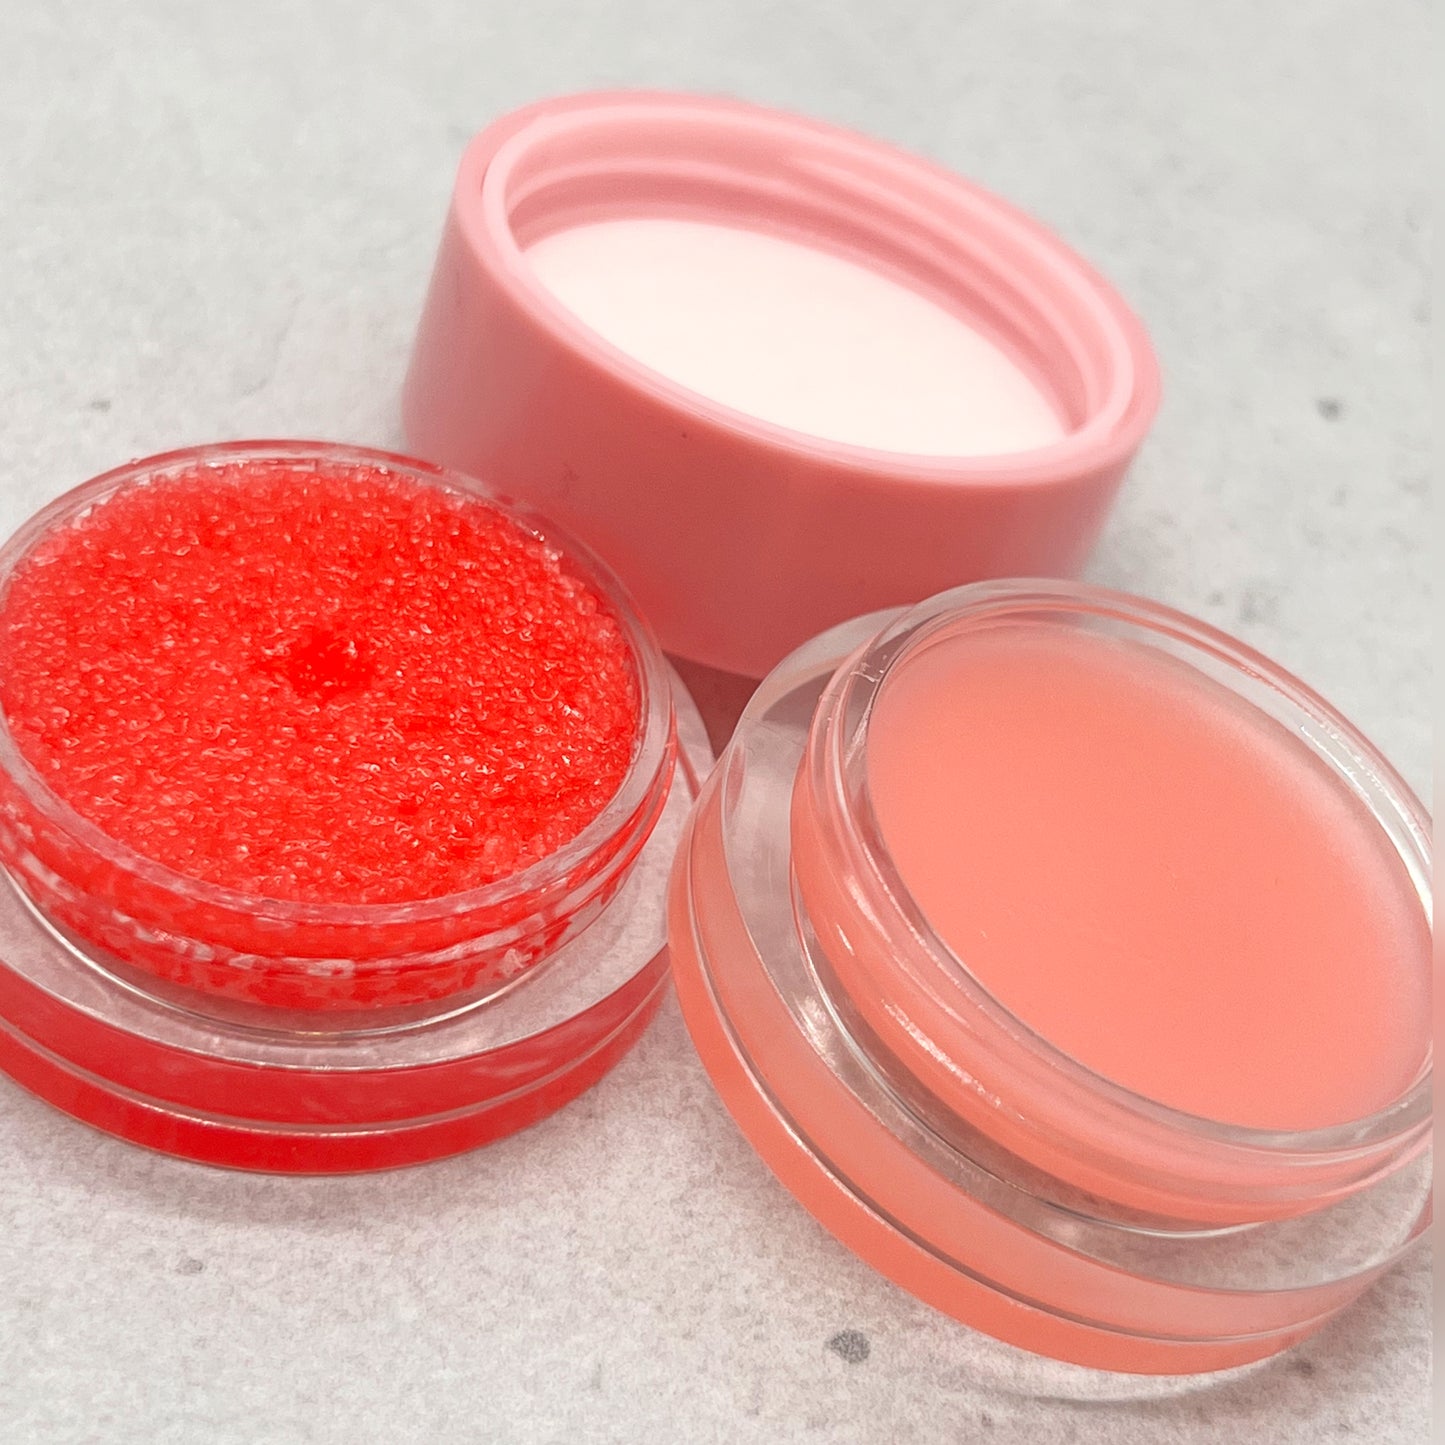 Bold and Luscious Lip Scrub and lip Mask combo up close. on the left, you can see the granulated strawberry scrub in its pot. on the right, you can see the lip mask which is also strawberry.